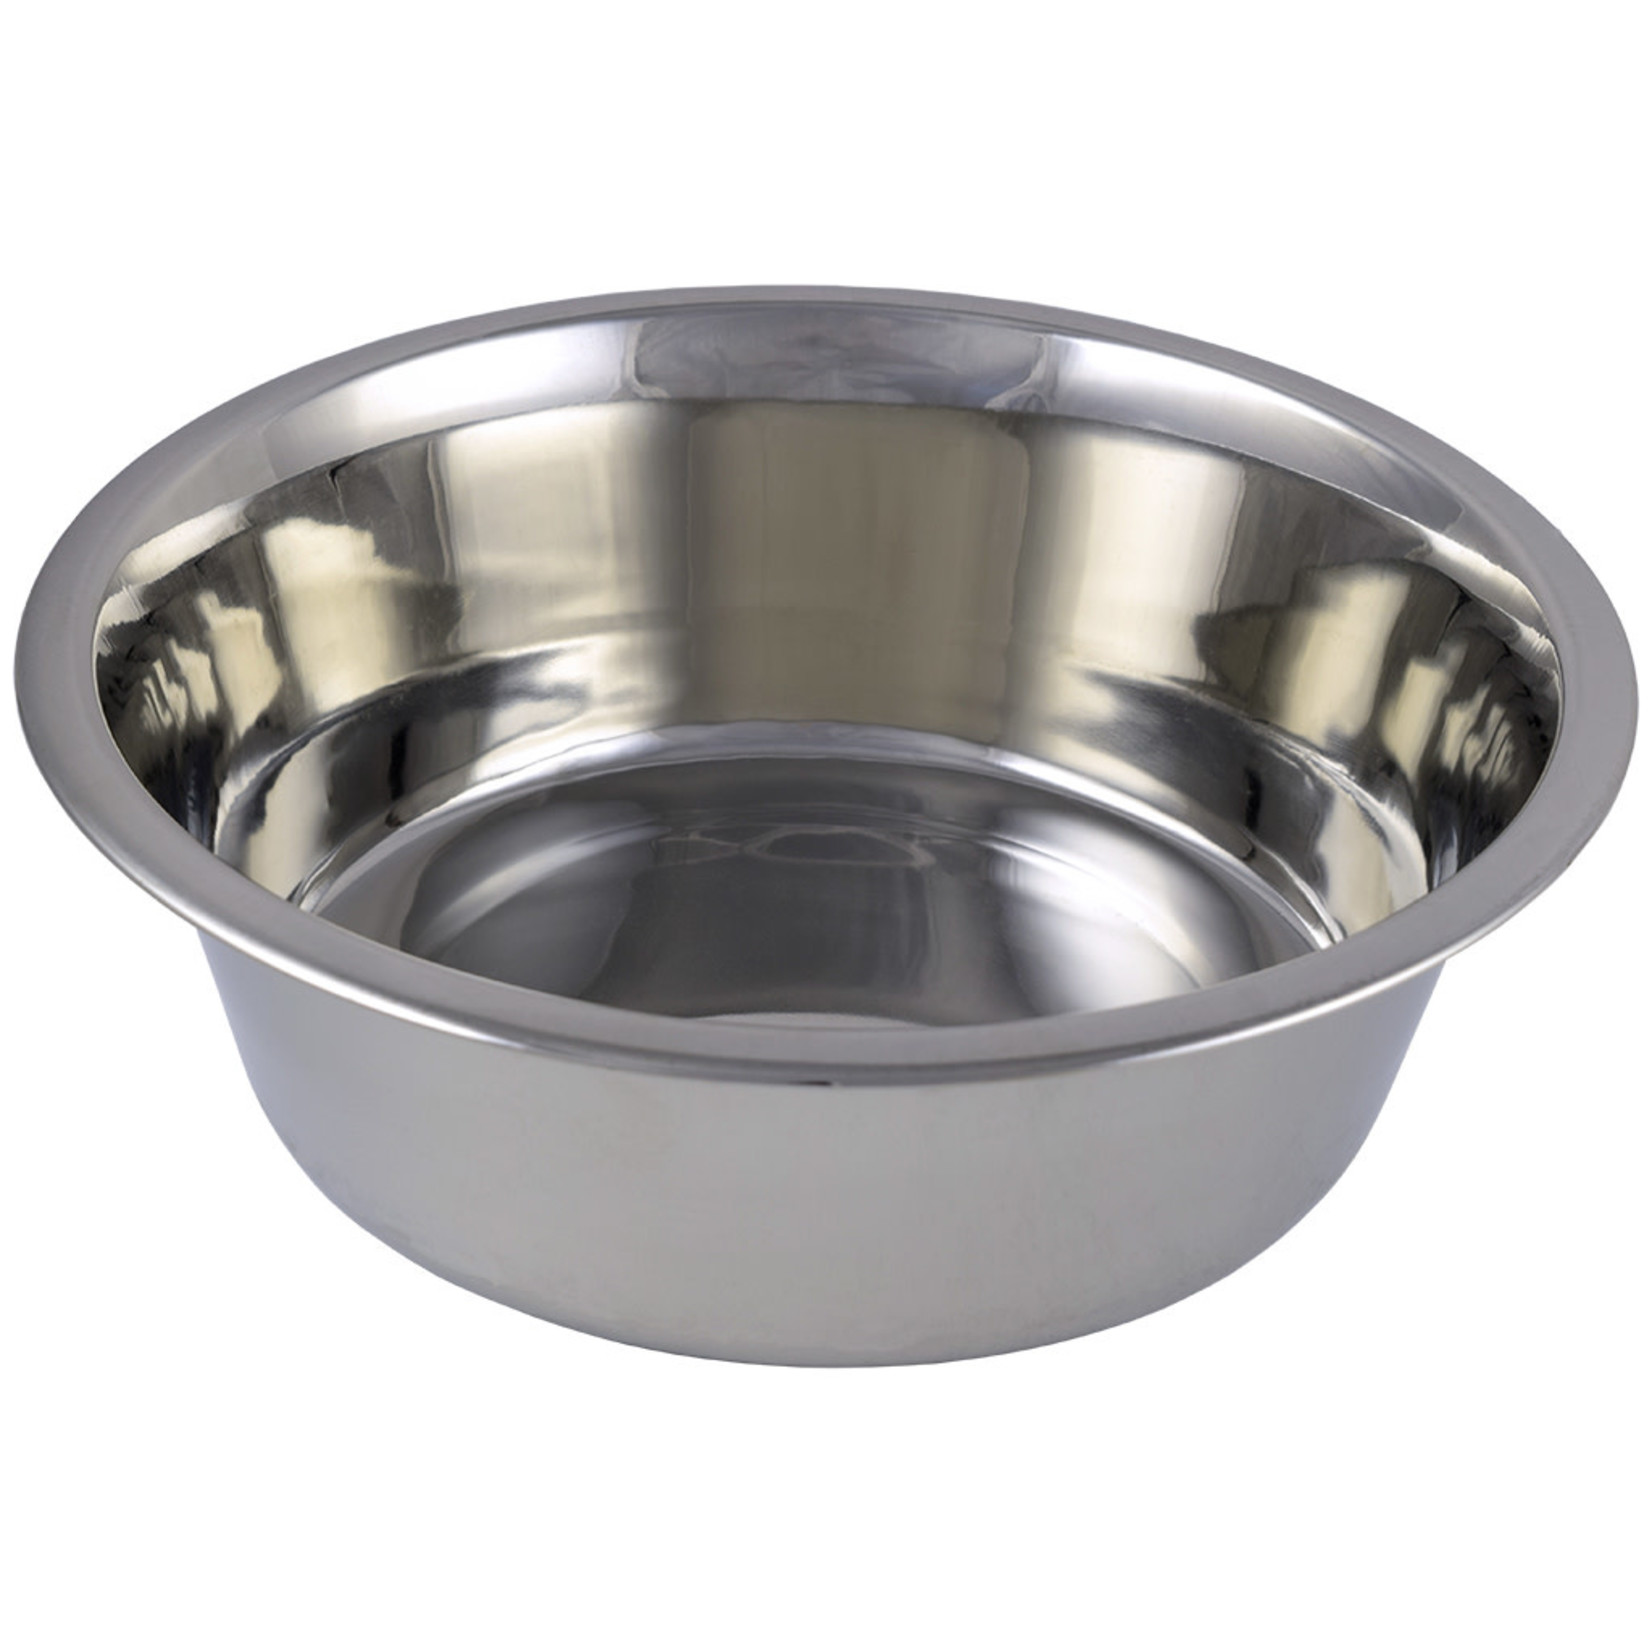 UNLEASHED UNLEASHED Stainless Steel Bowl